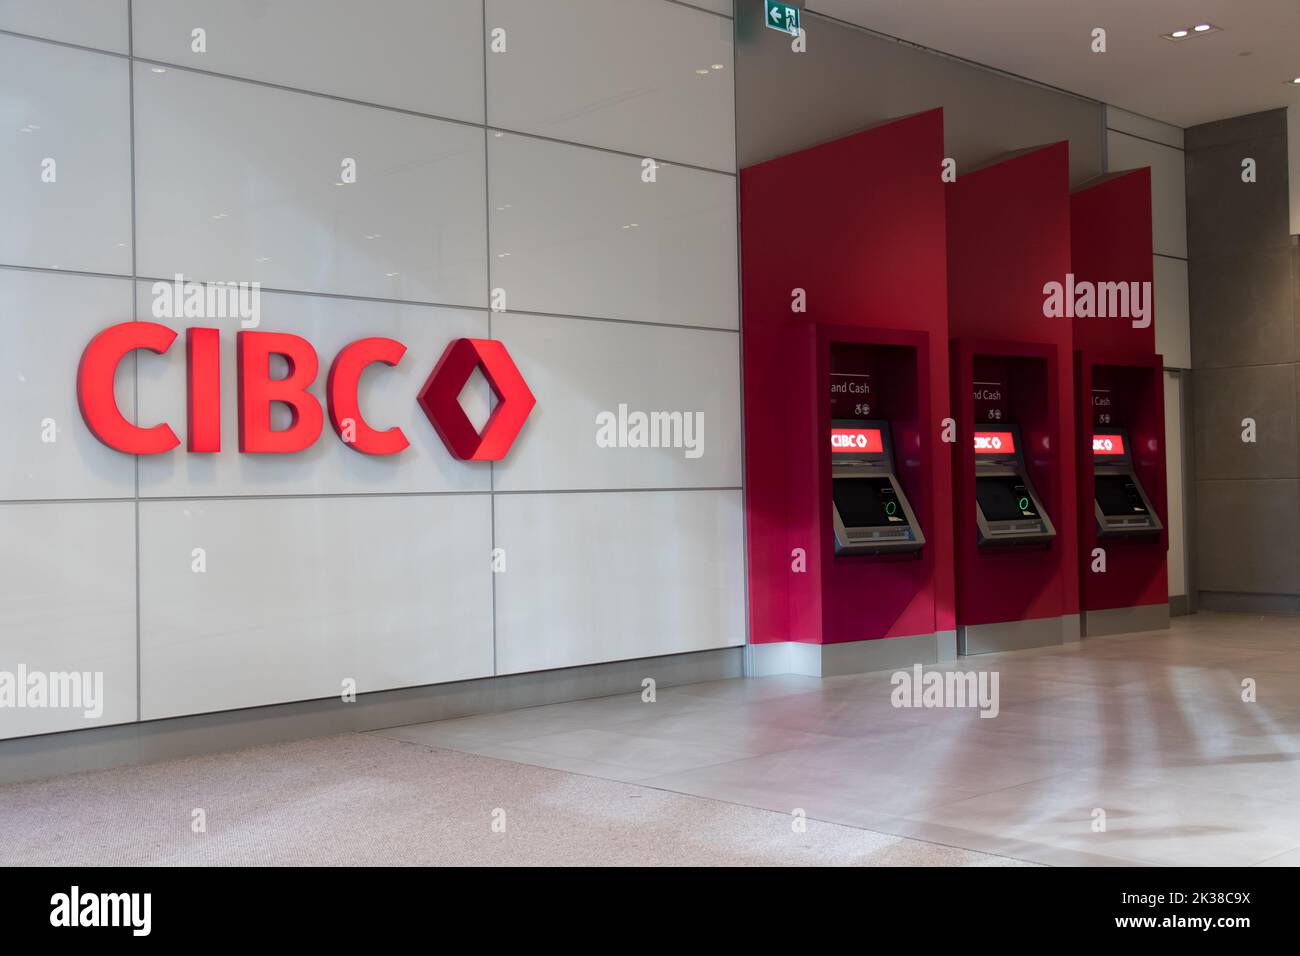 Newly installed CIBC atm machines are seen in a downtown Toronto building; CIBC is one of Canada's Big 5 banks, the 5th largest in Canada. Stock Photo